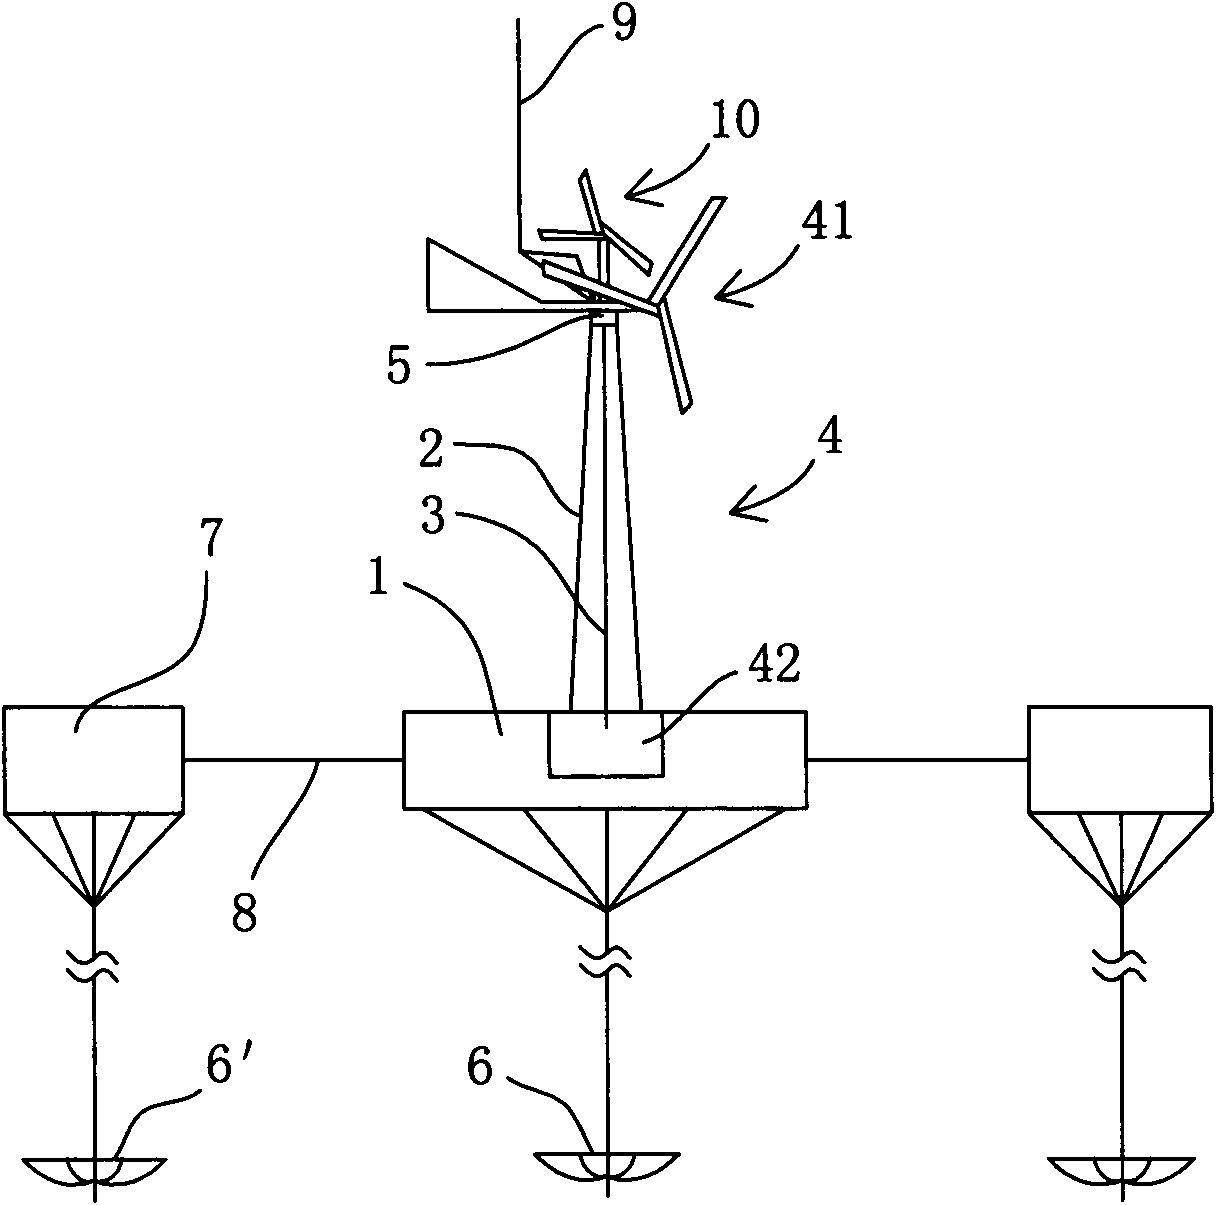 Floating-type water wind power generating device